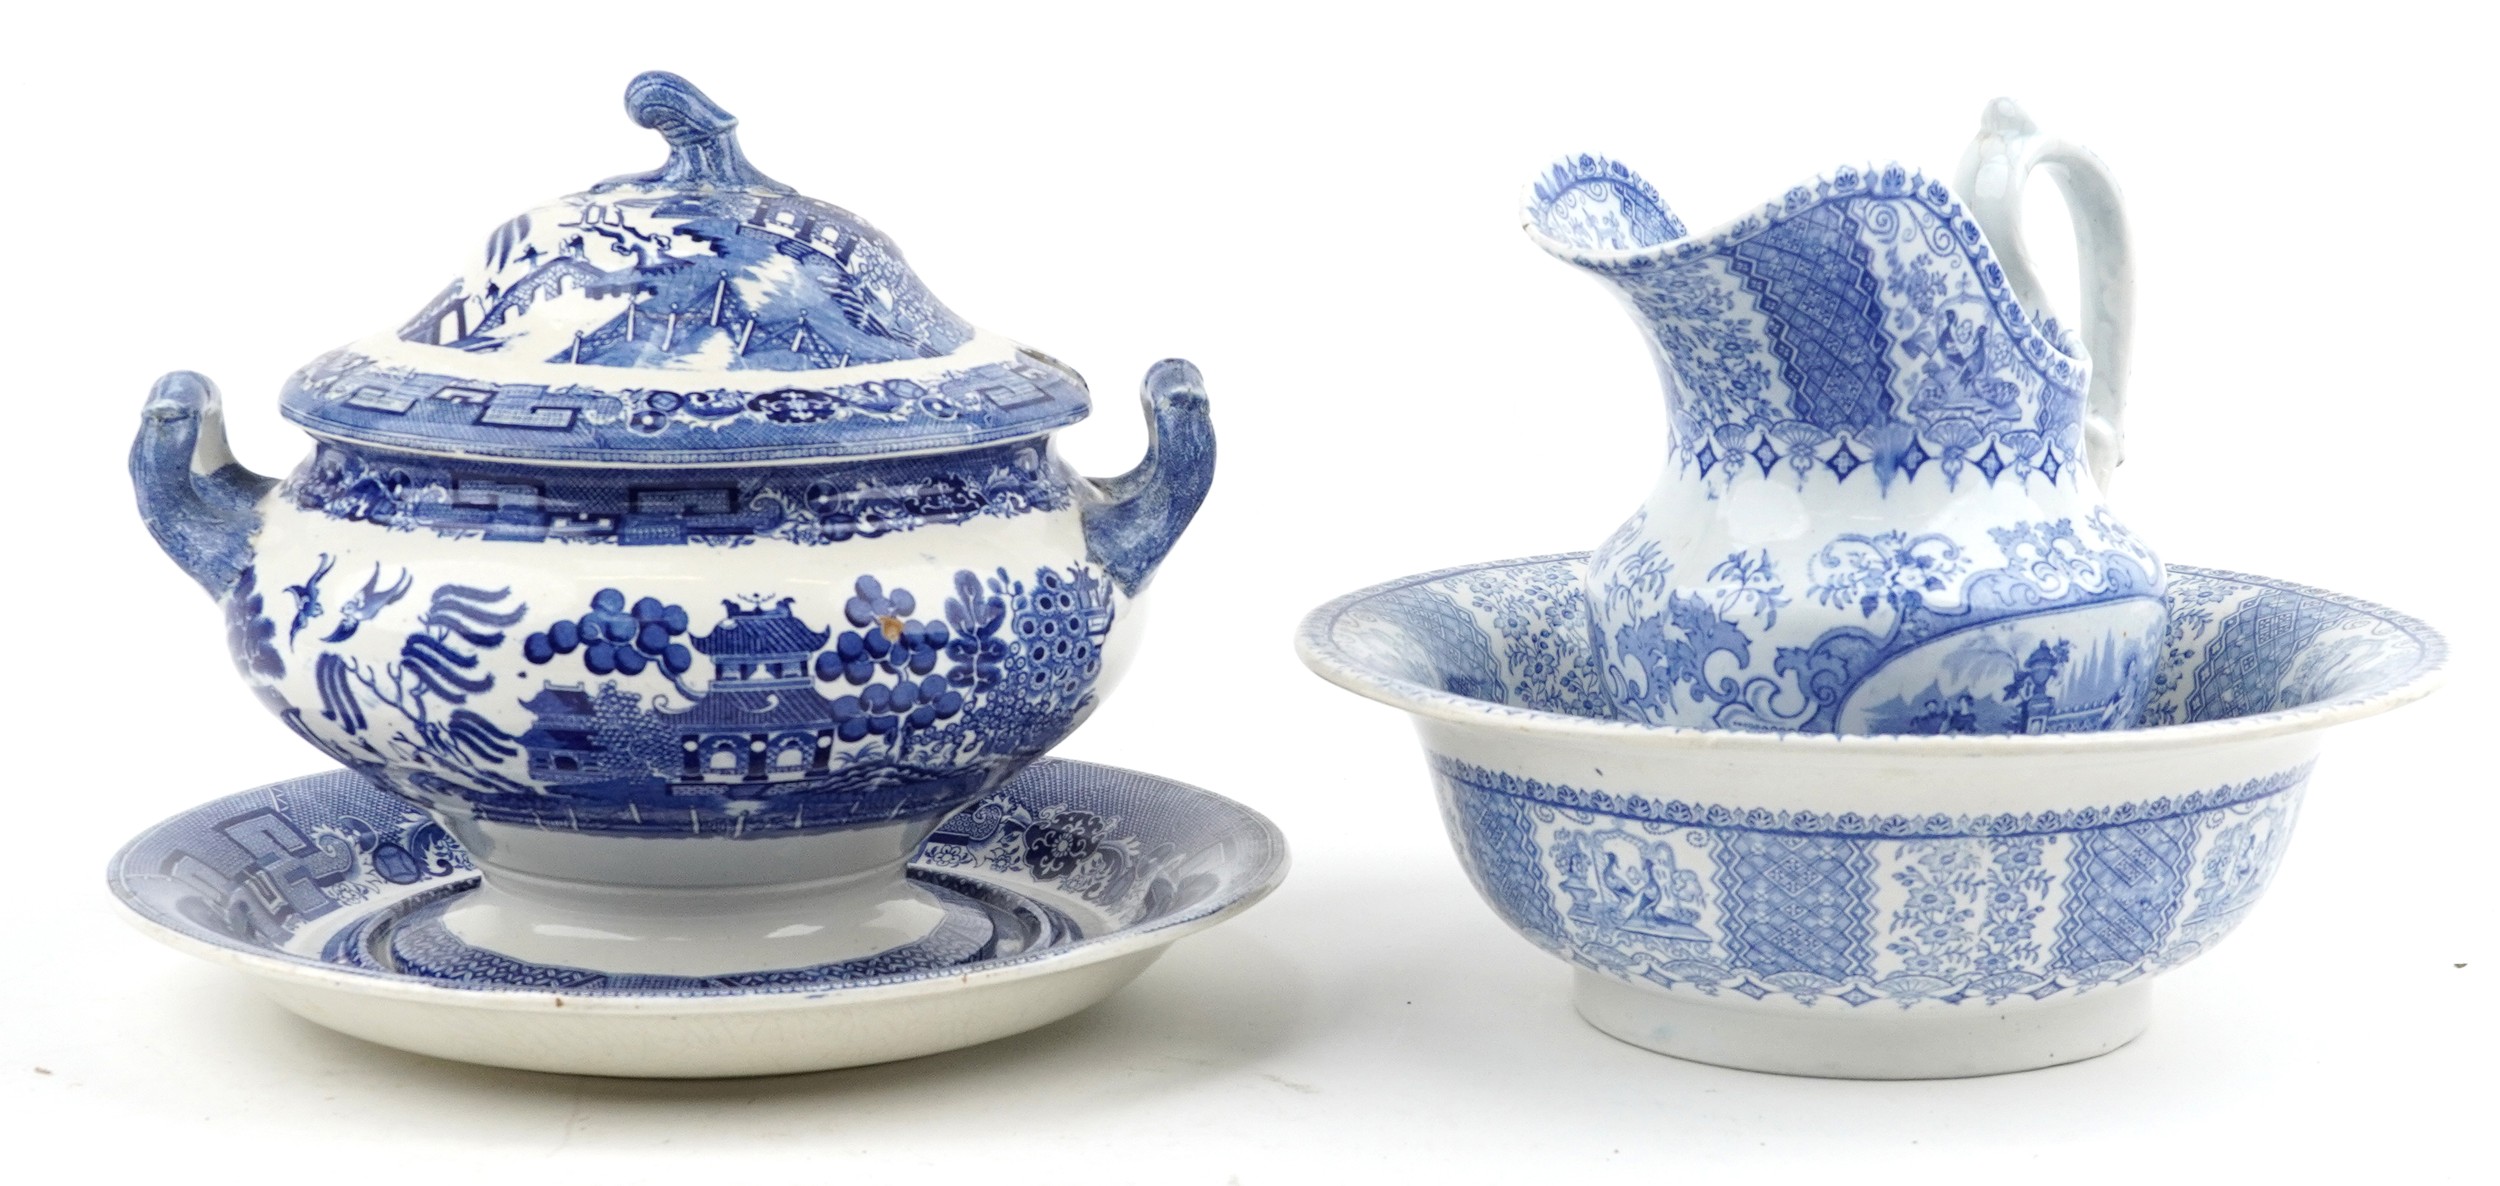 Victorian blue and white wash jug and basin, transfer printed in the Tyrolienne pattern and a